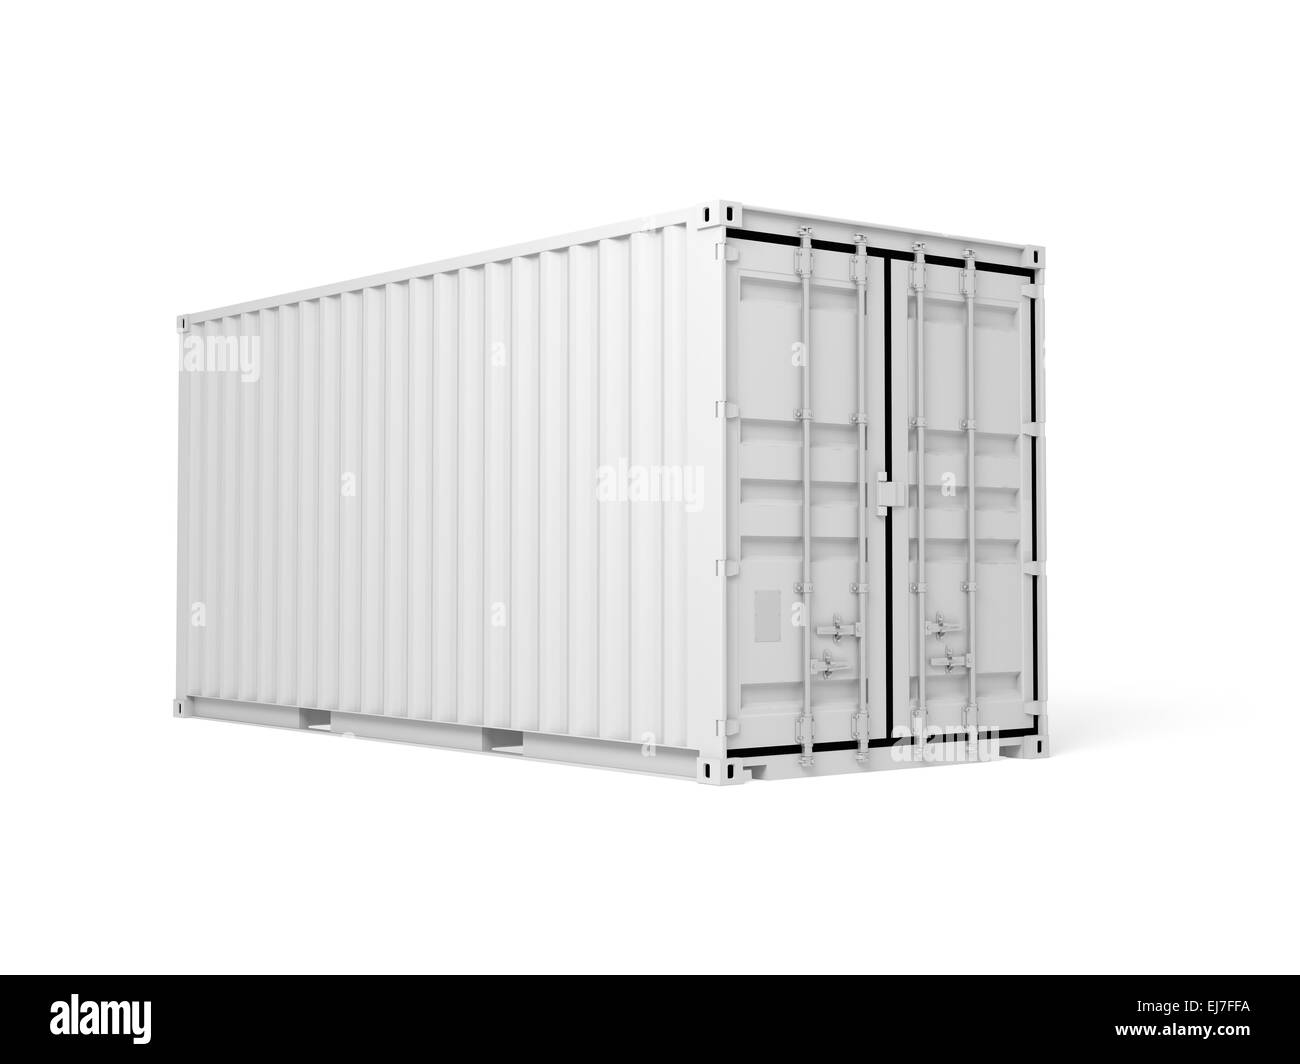 Cargo container isolated on white background , Digital 3d illustration Stock Photo